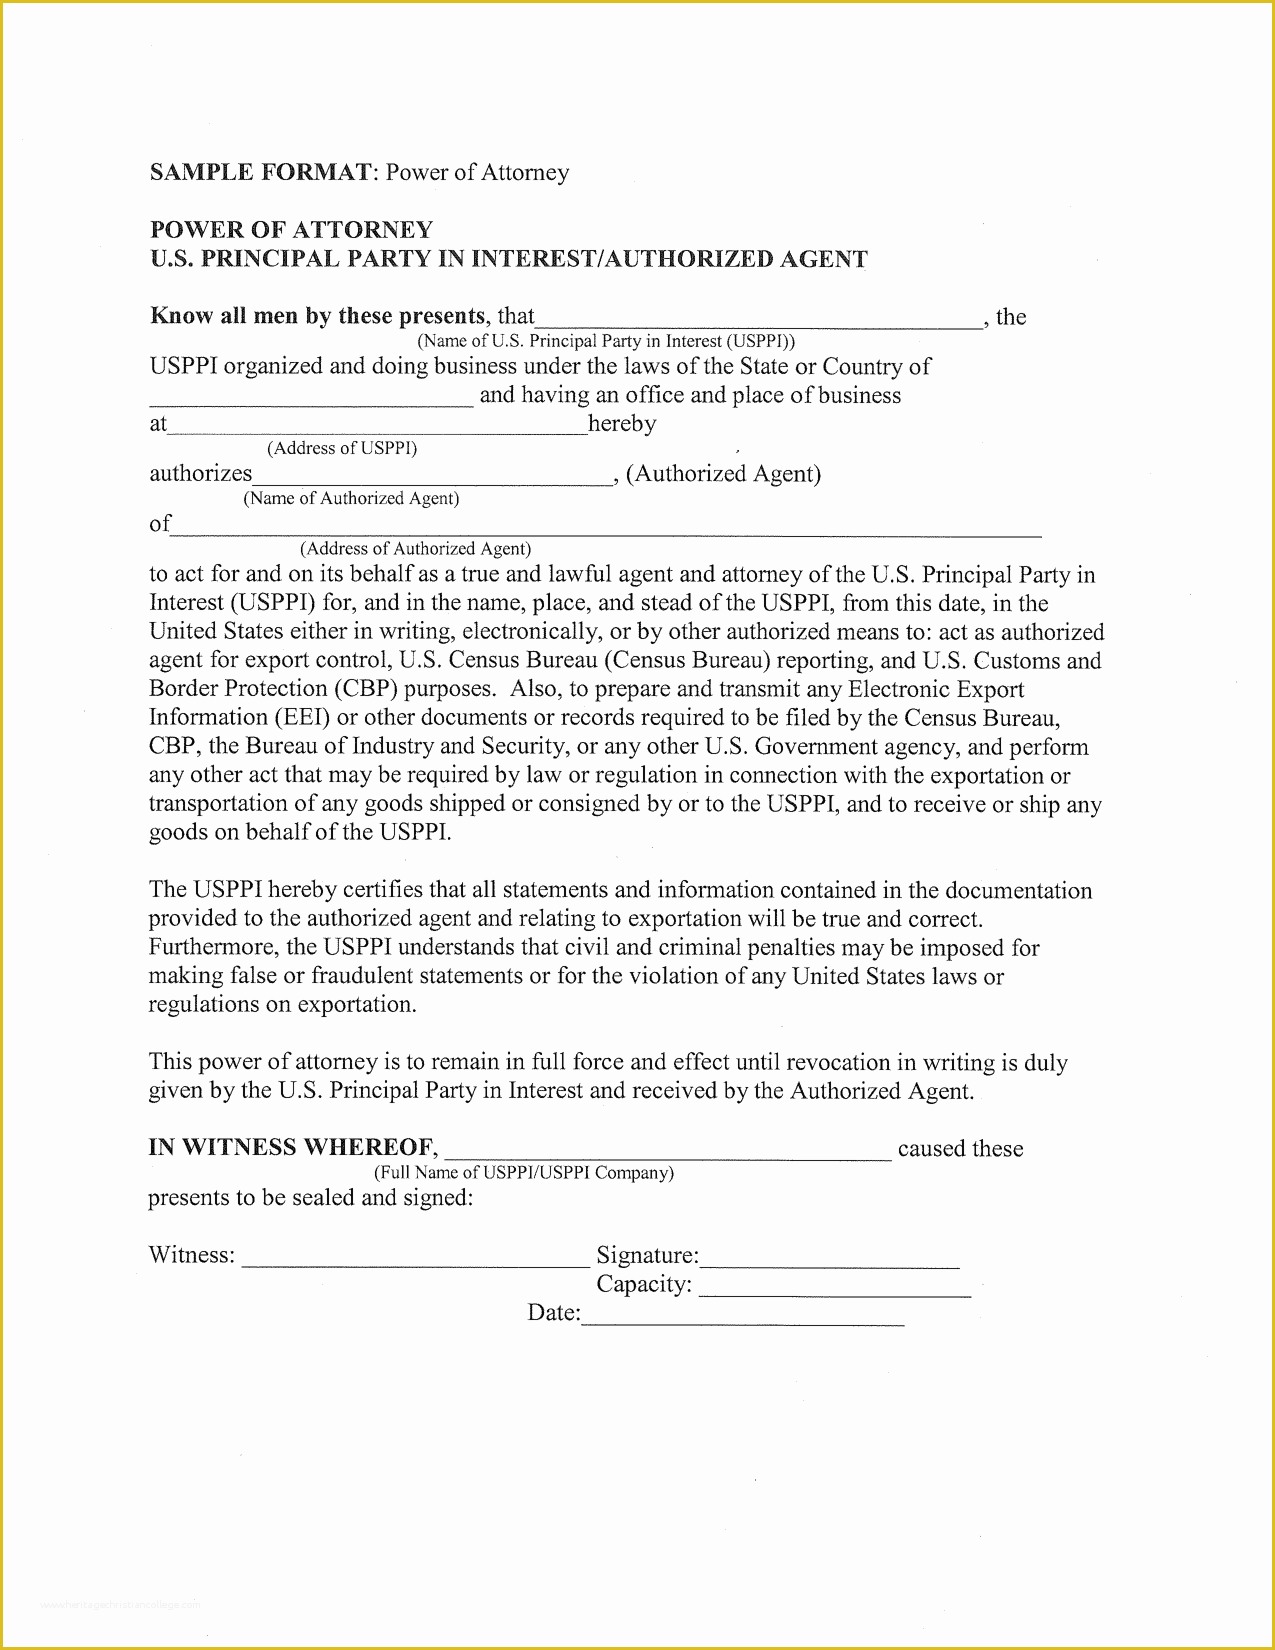 Free Poa Template Of Power attorney Template Heritagechristiancollege